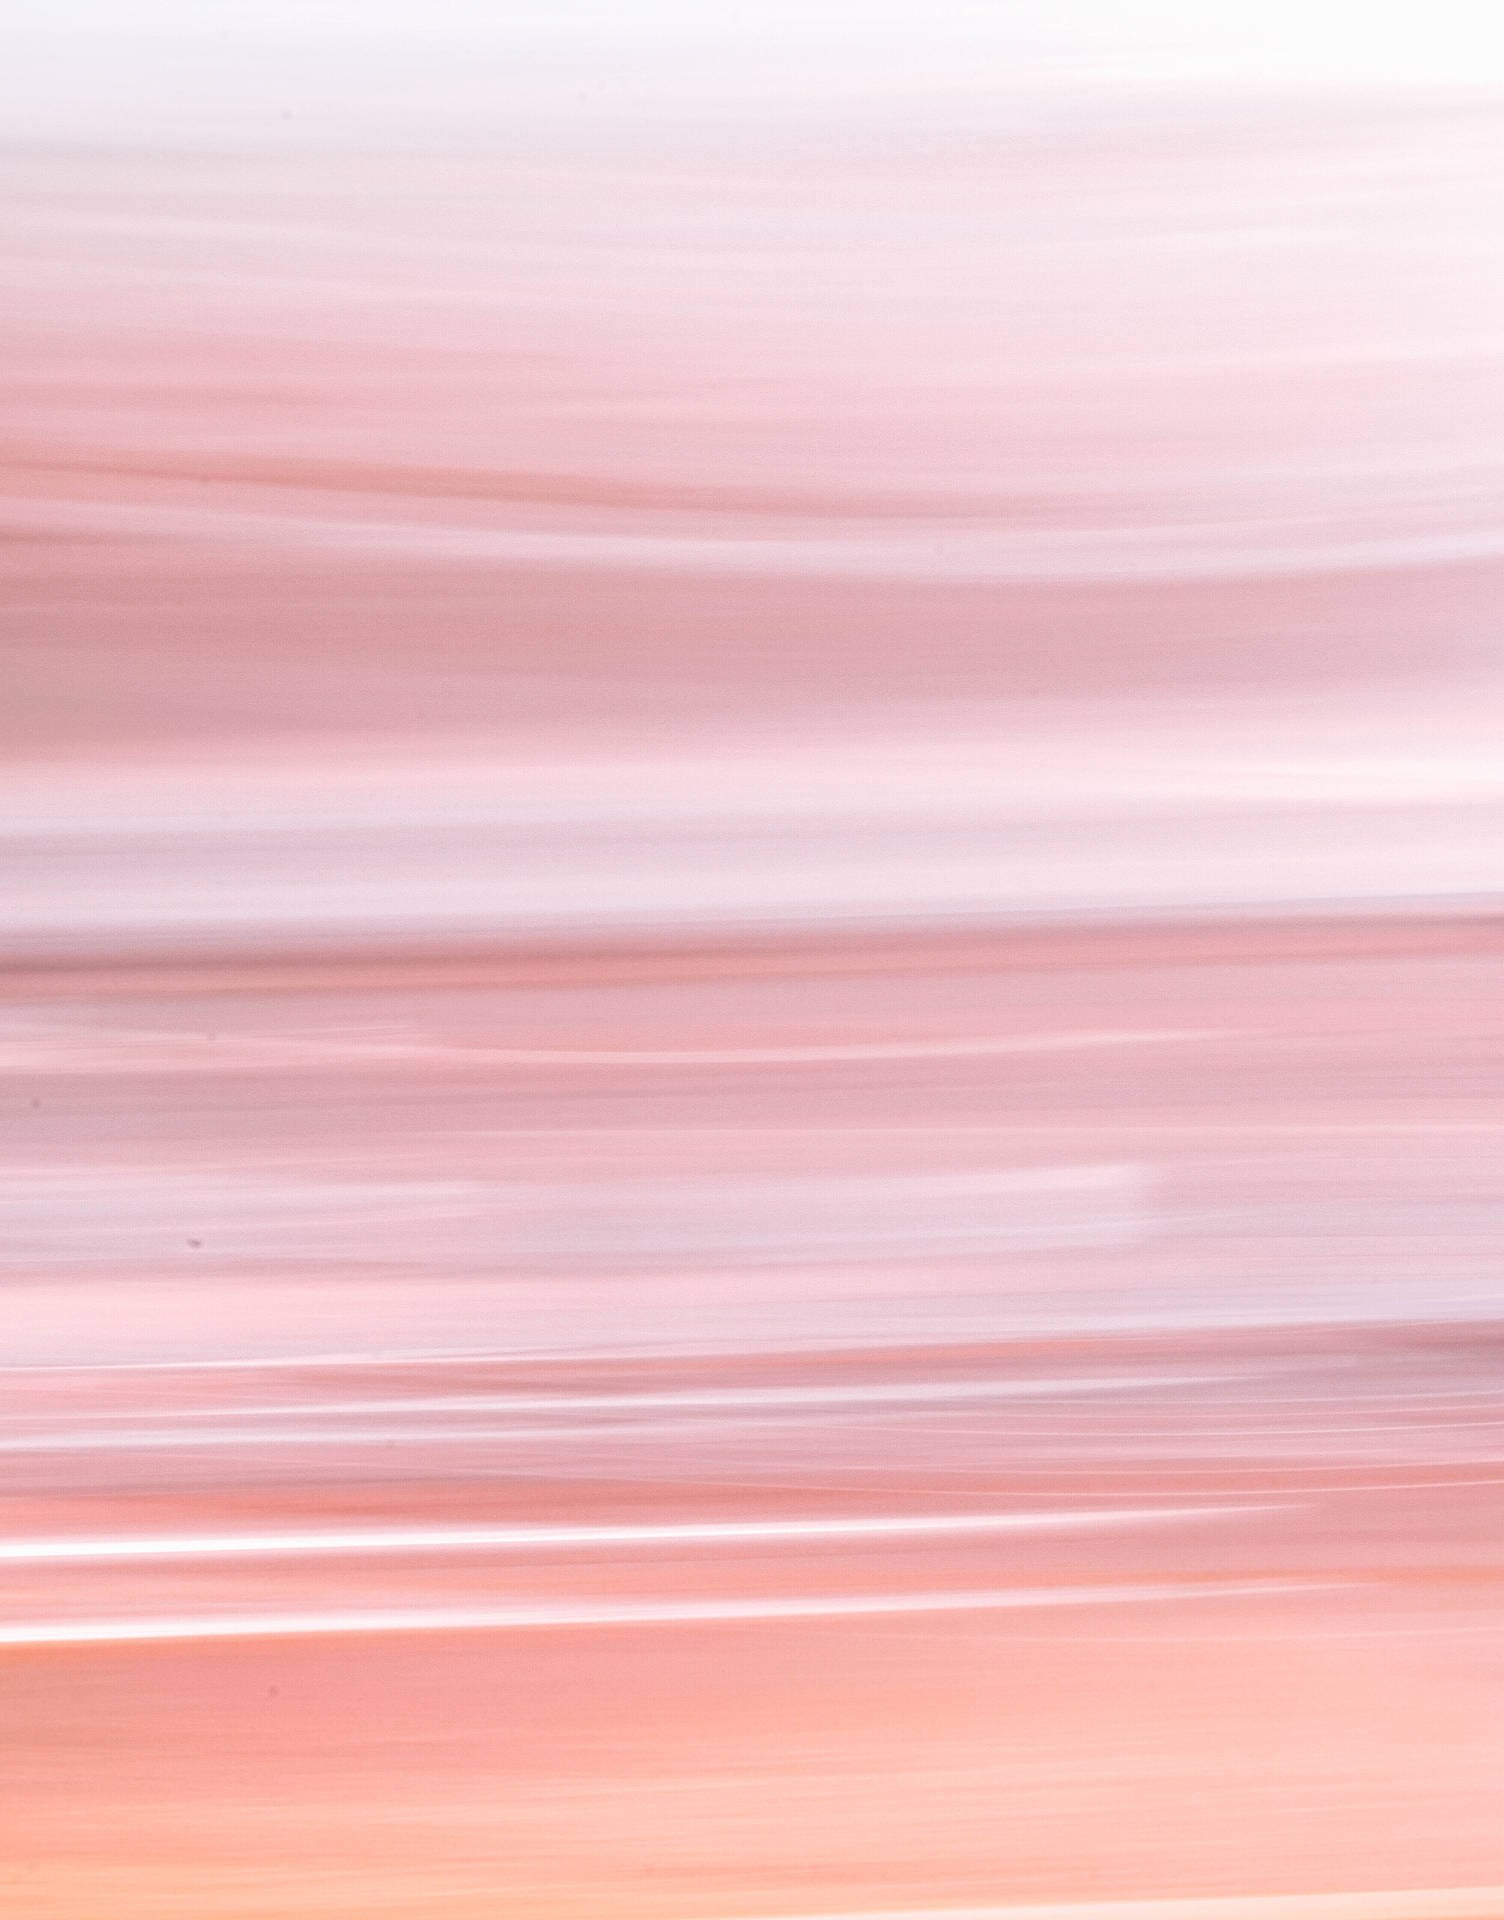 Pastel Pink 4000X5105 Wallpaper and Background Image